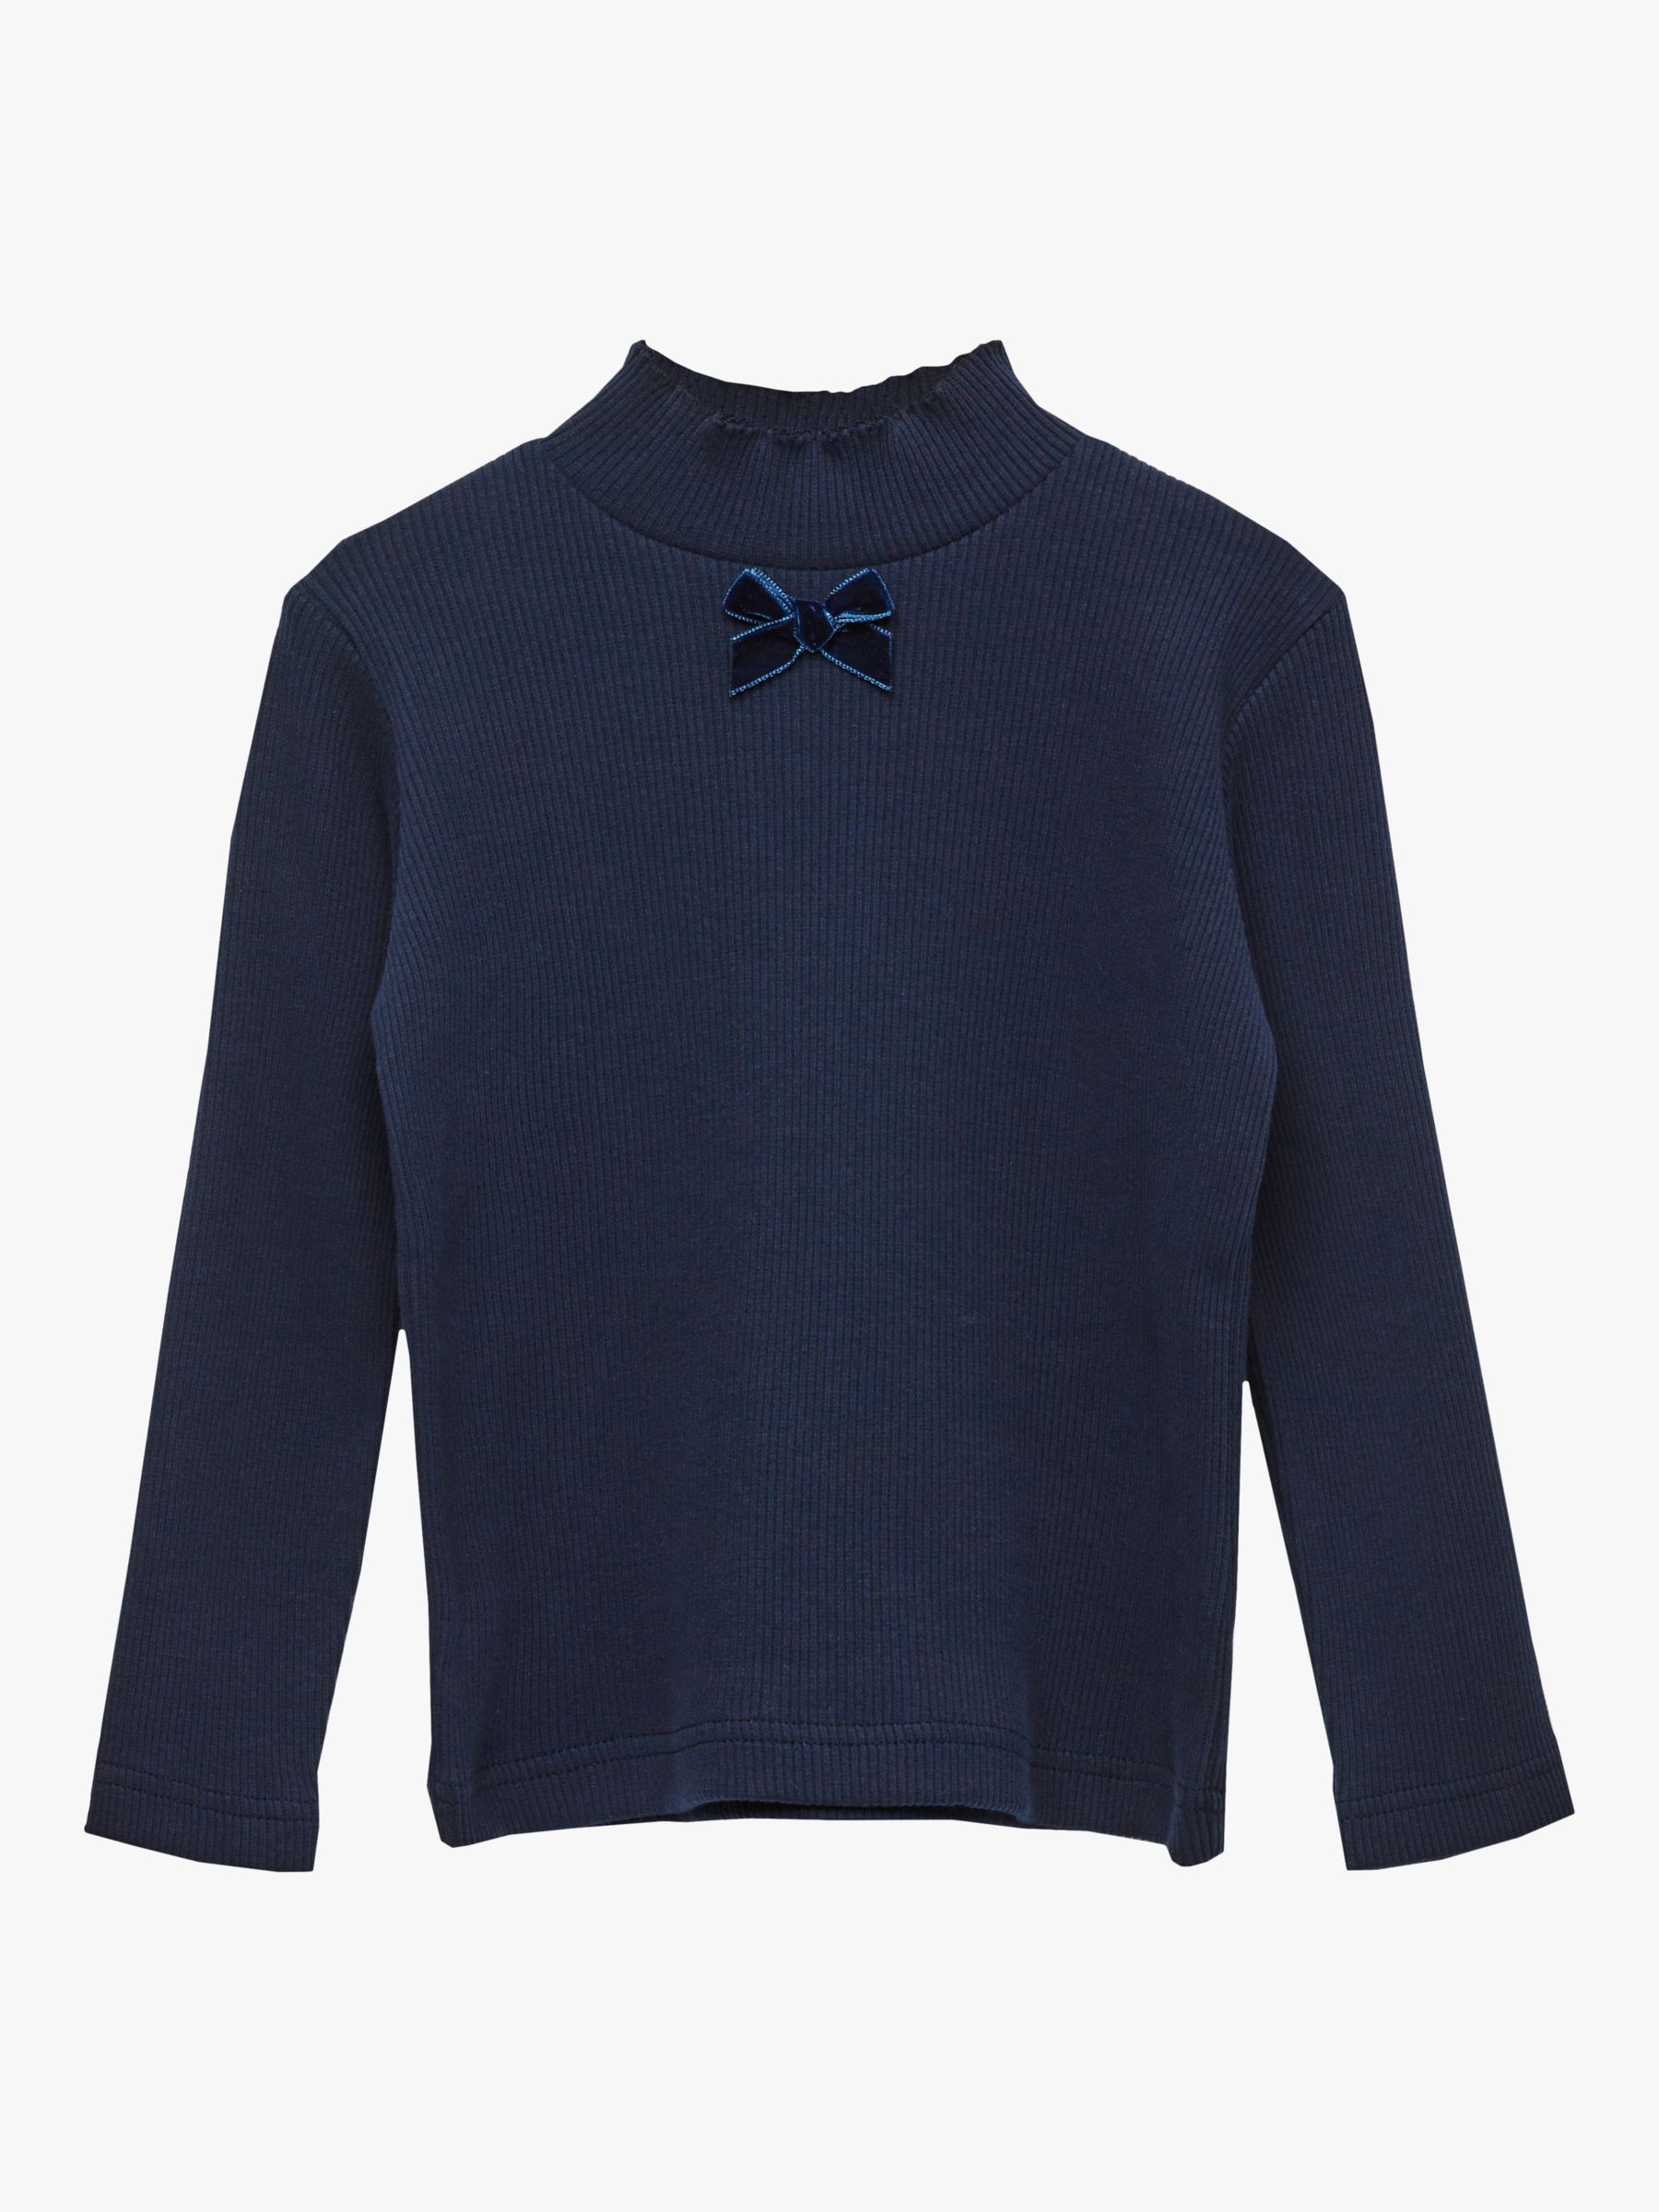 Trotters Kids' Grace Bow Detail Jersey Top, Navy at John Lewis & Partners